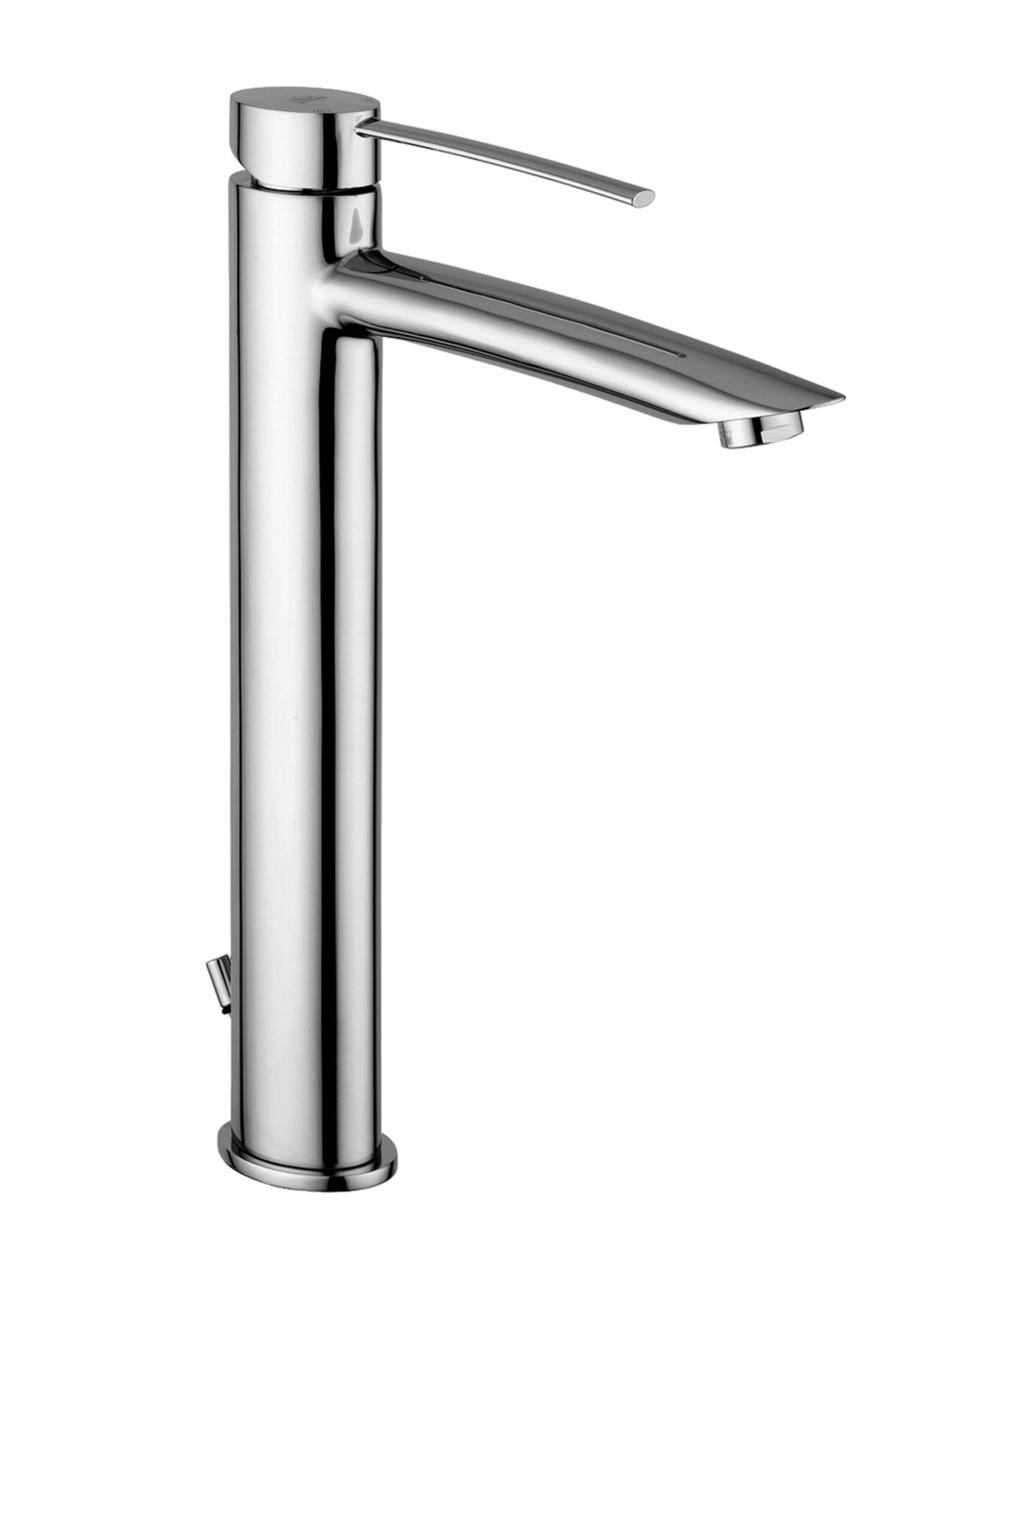 Miscelatore lavabo prolungato completo di: aeratore M24x1 set 2 flessibili inox 3/8 G Tall wash basin mixer complete with: aerator M24x1 set of 2 stainless steel hoses 3/8 G BR 081.